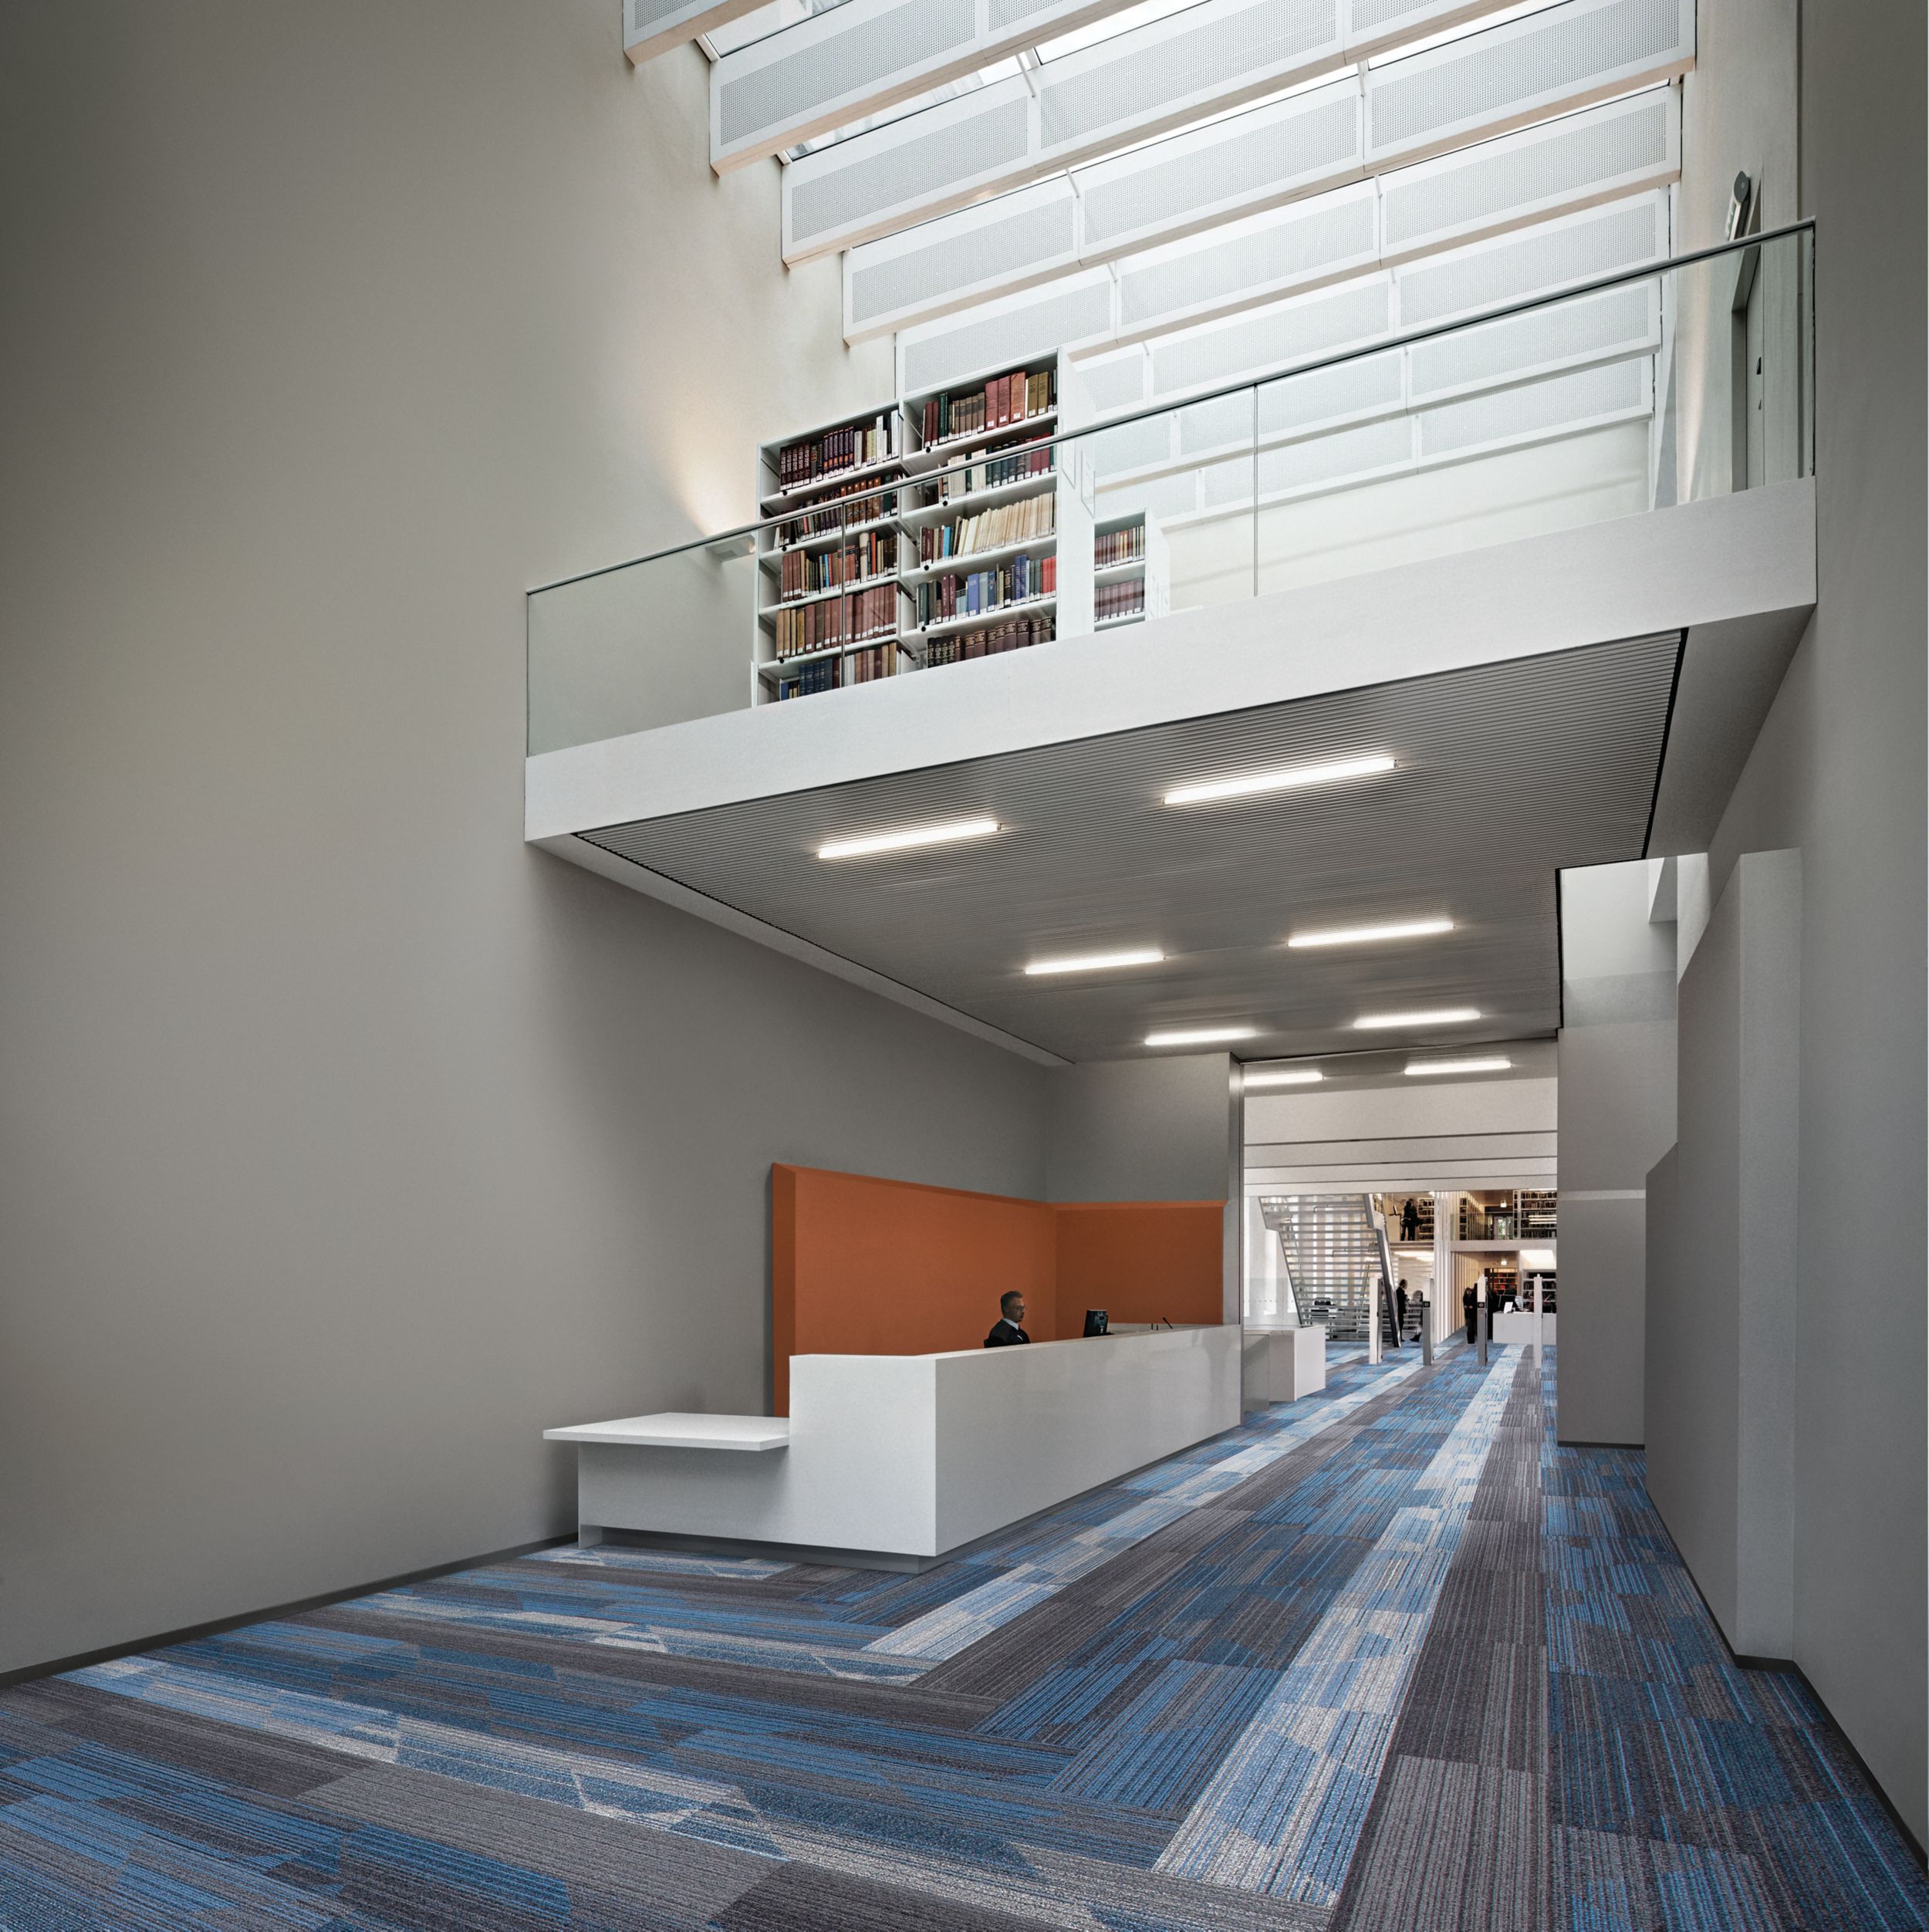 Interface Driftwood and Shiver Me Timbers plank carpet tile in recpetionist area of library imagen número 6